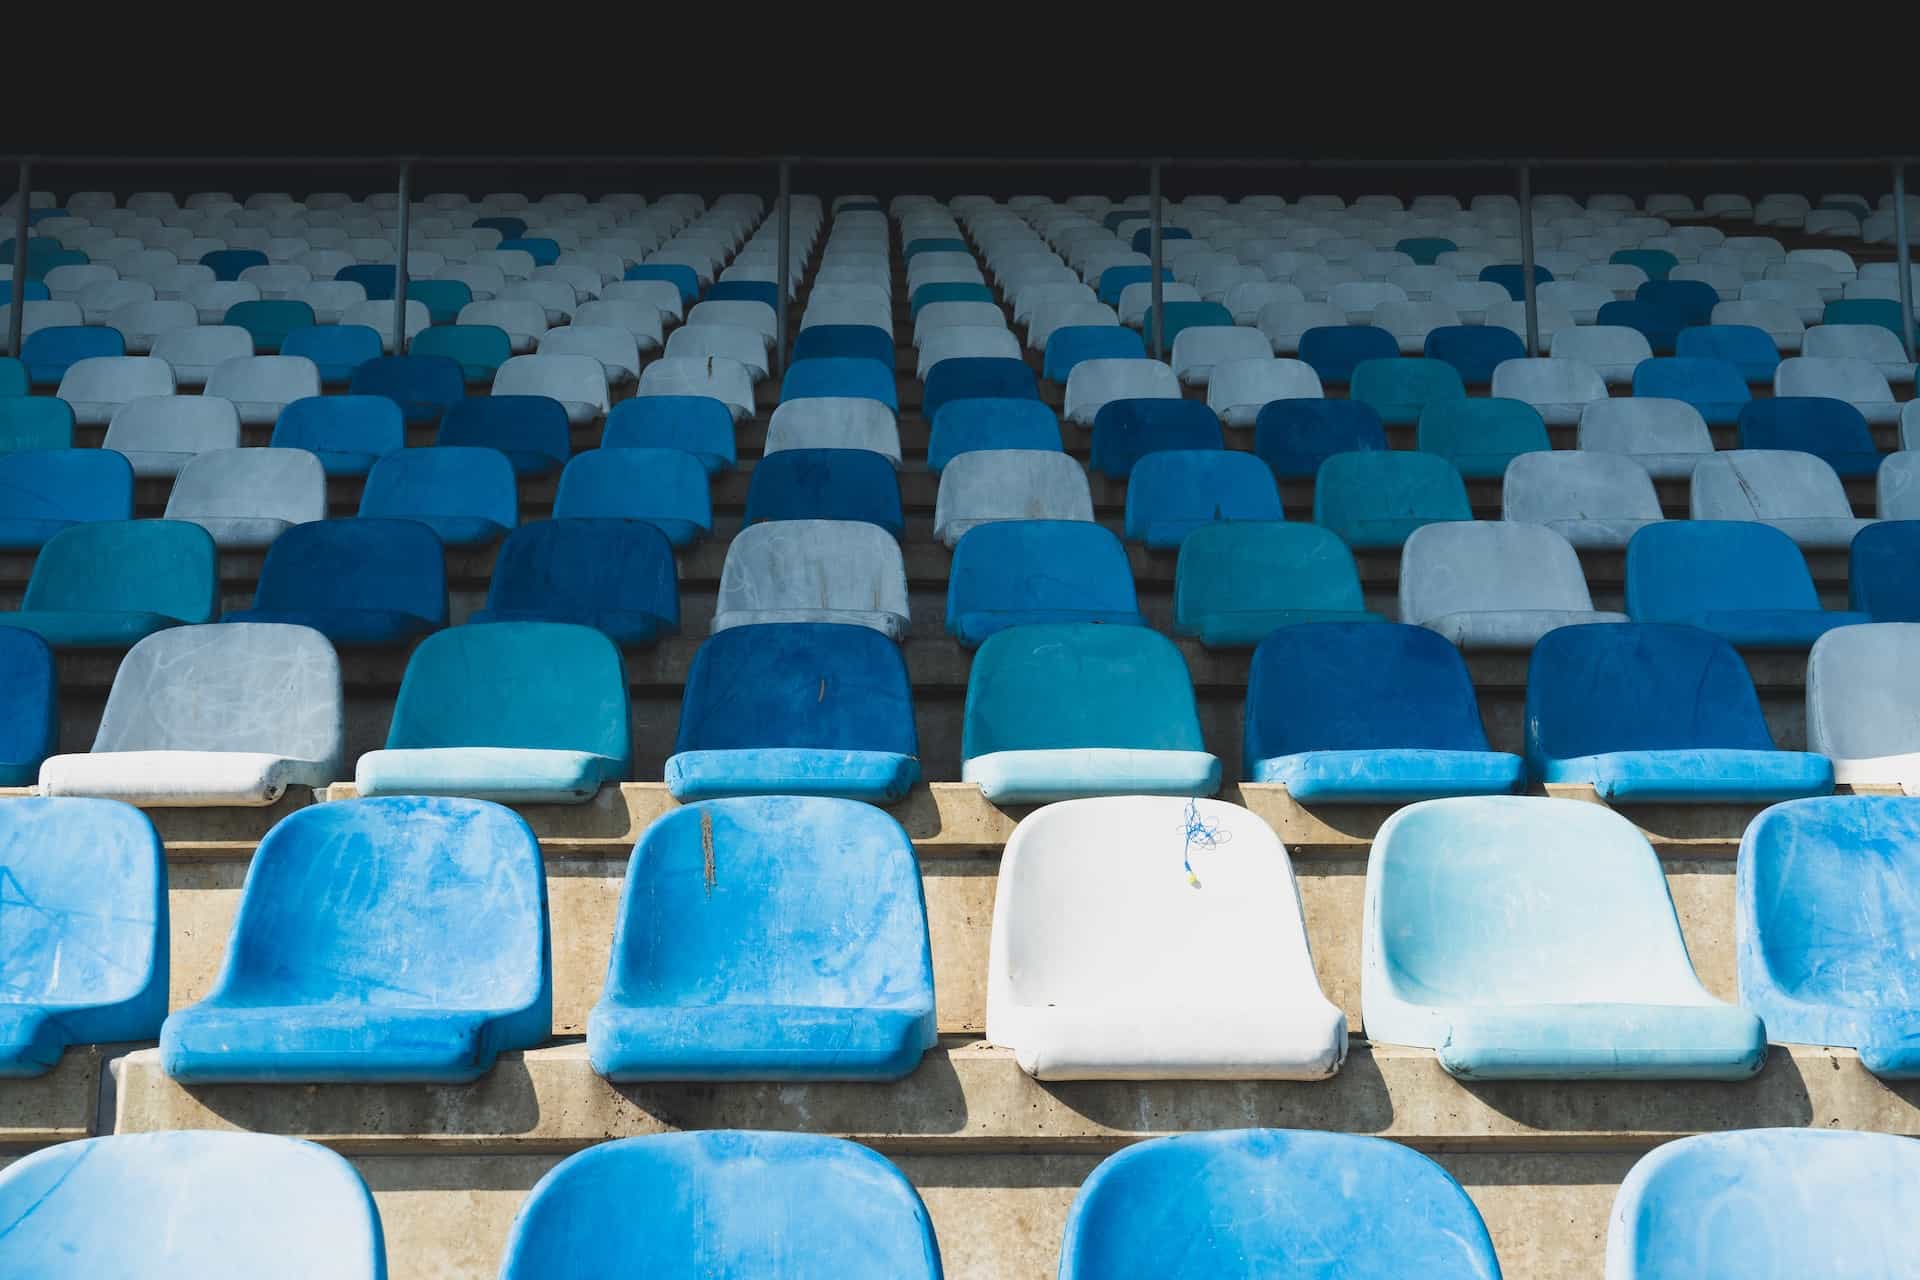 Empty blue plastic seats in a sporting grandstand.